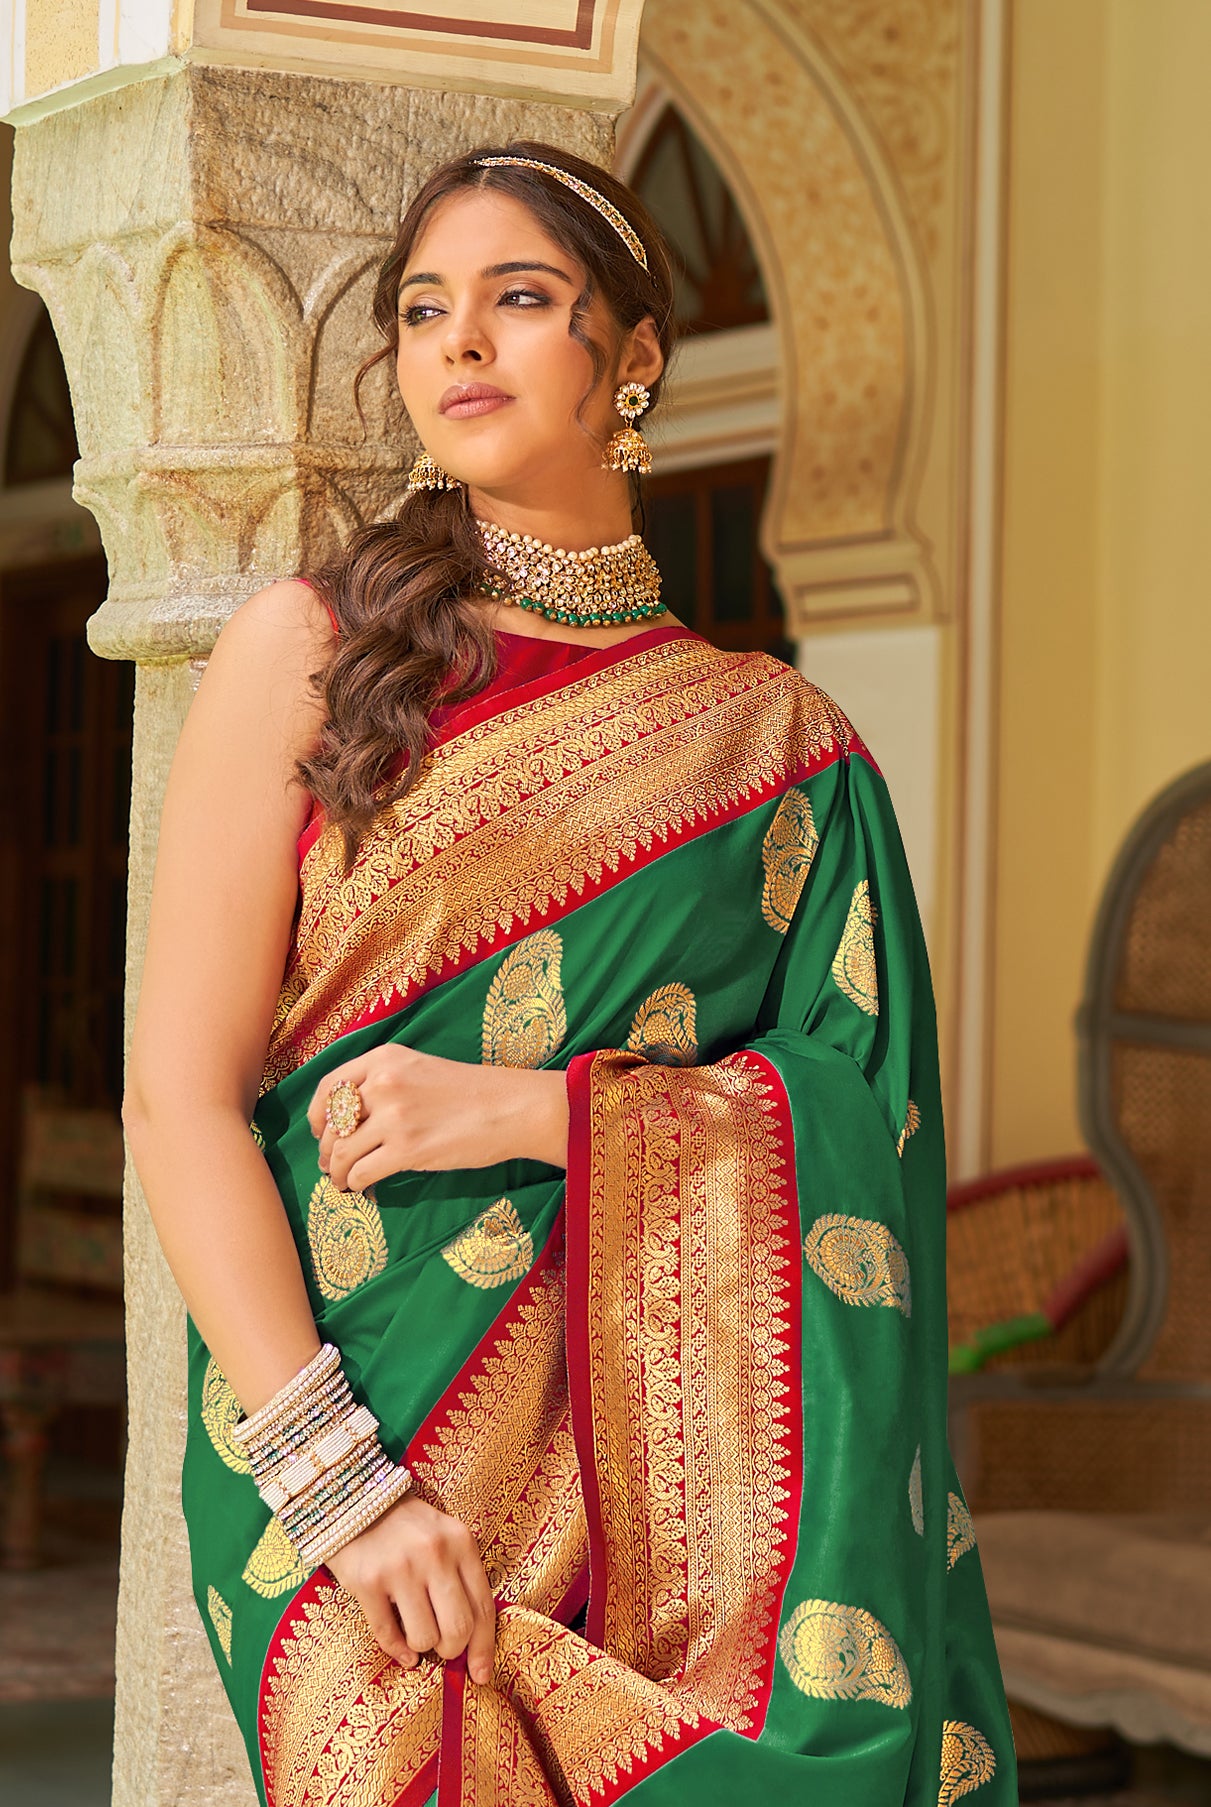 Bottle Green With Red Border Silk Traditional Saree – paanericlothing